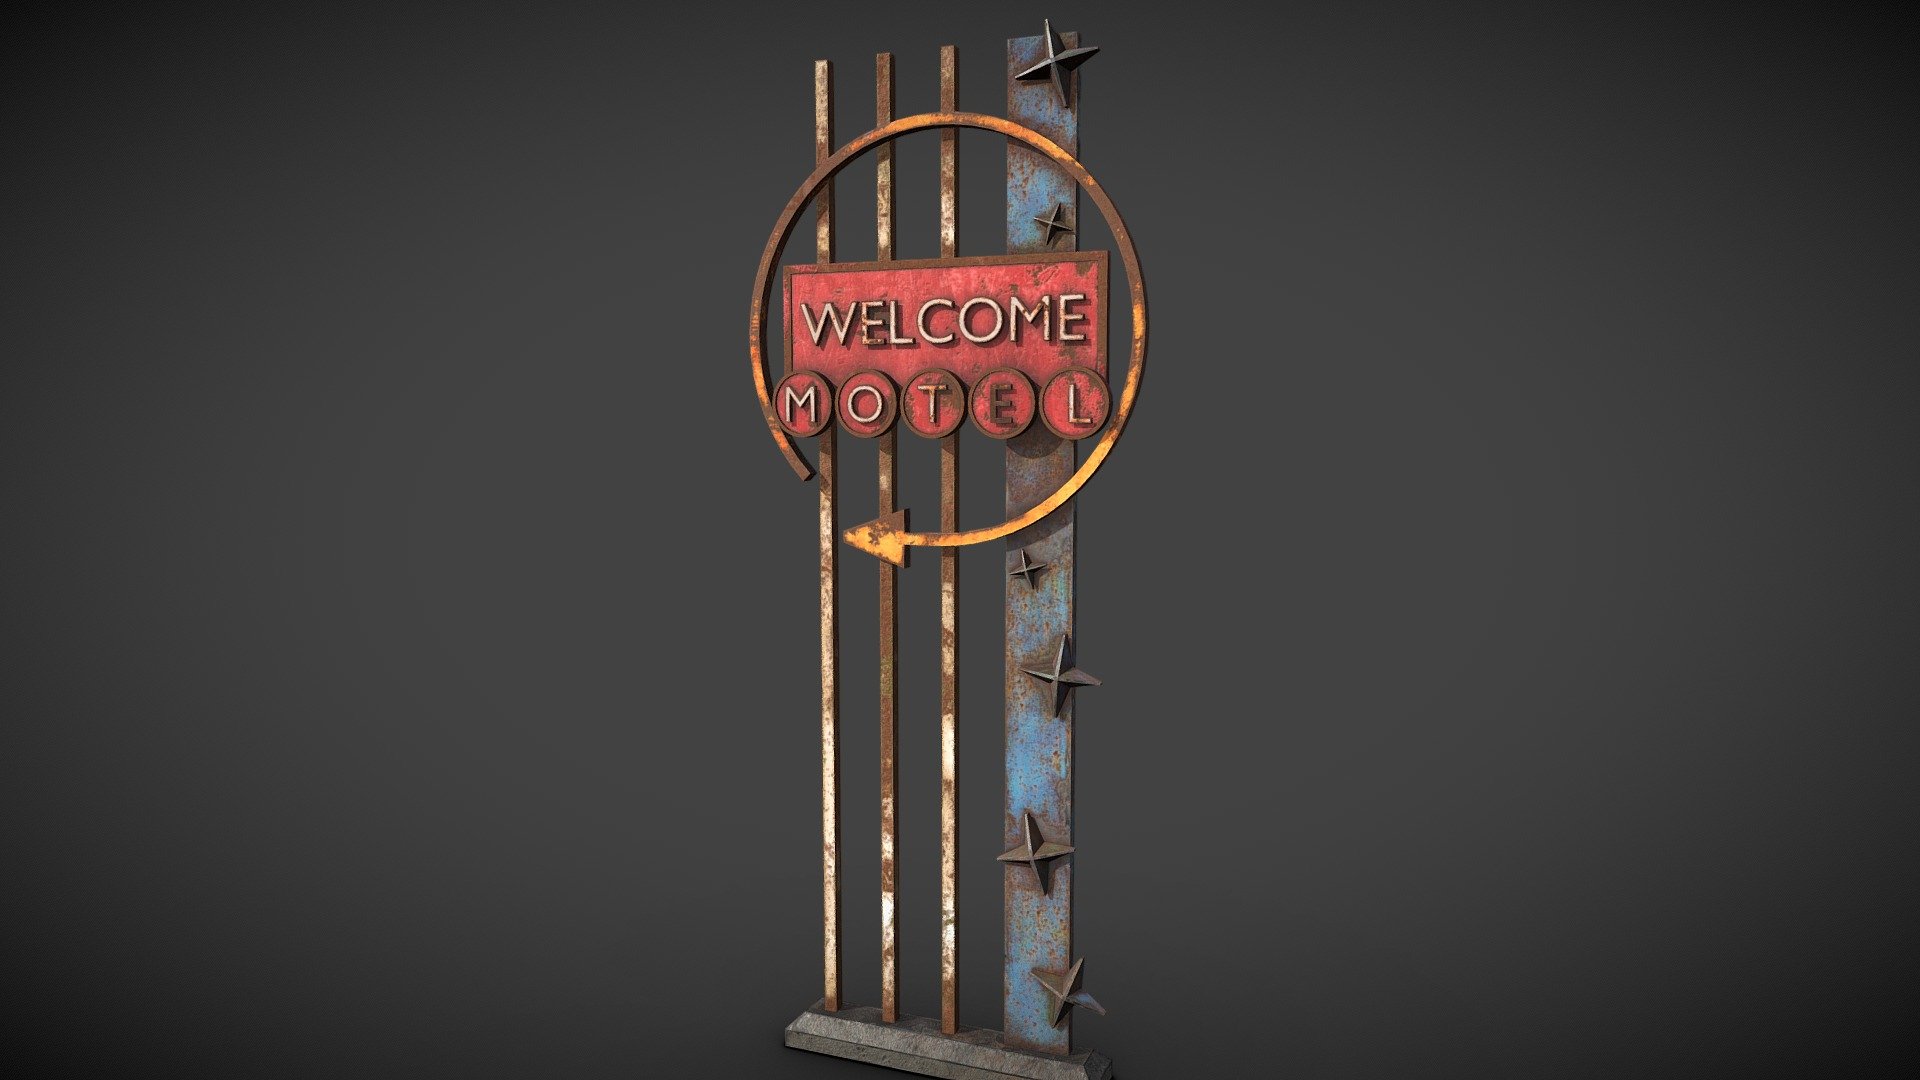 Rust Classic American Motel signboard 

Textures size 4096x4096

Including maps: * Base Color * Roughness * Metallic * Normal * Height * AO

Created in Blender The texture was created in Substance 3D Painter - Rust Classic American Motel signboard - Buy Royalty Free 3D model by exiS7-Gs 3d model